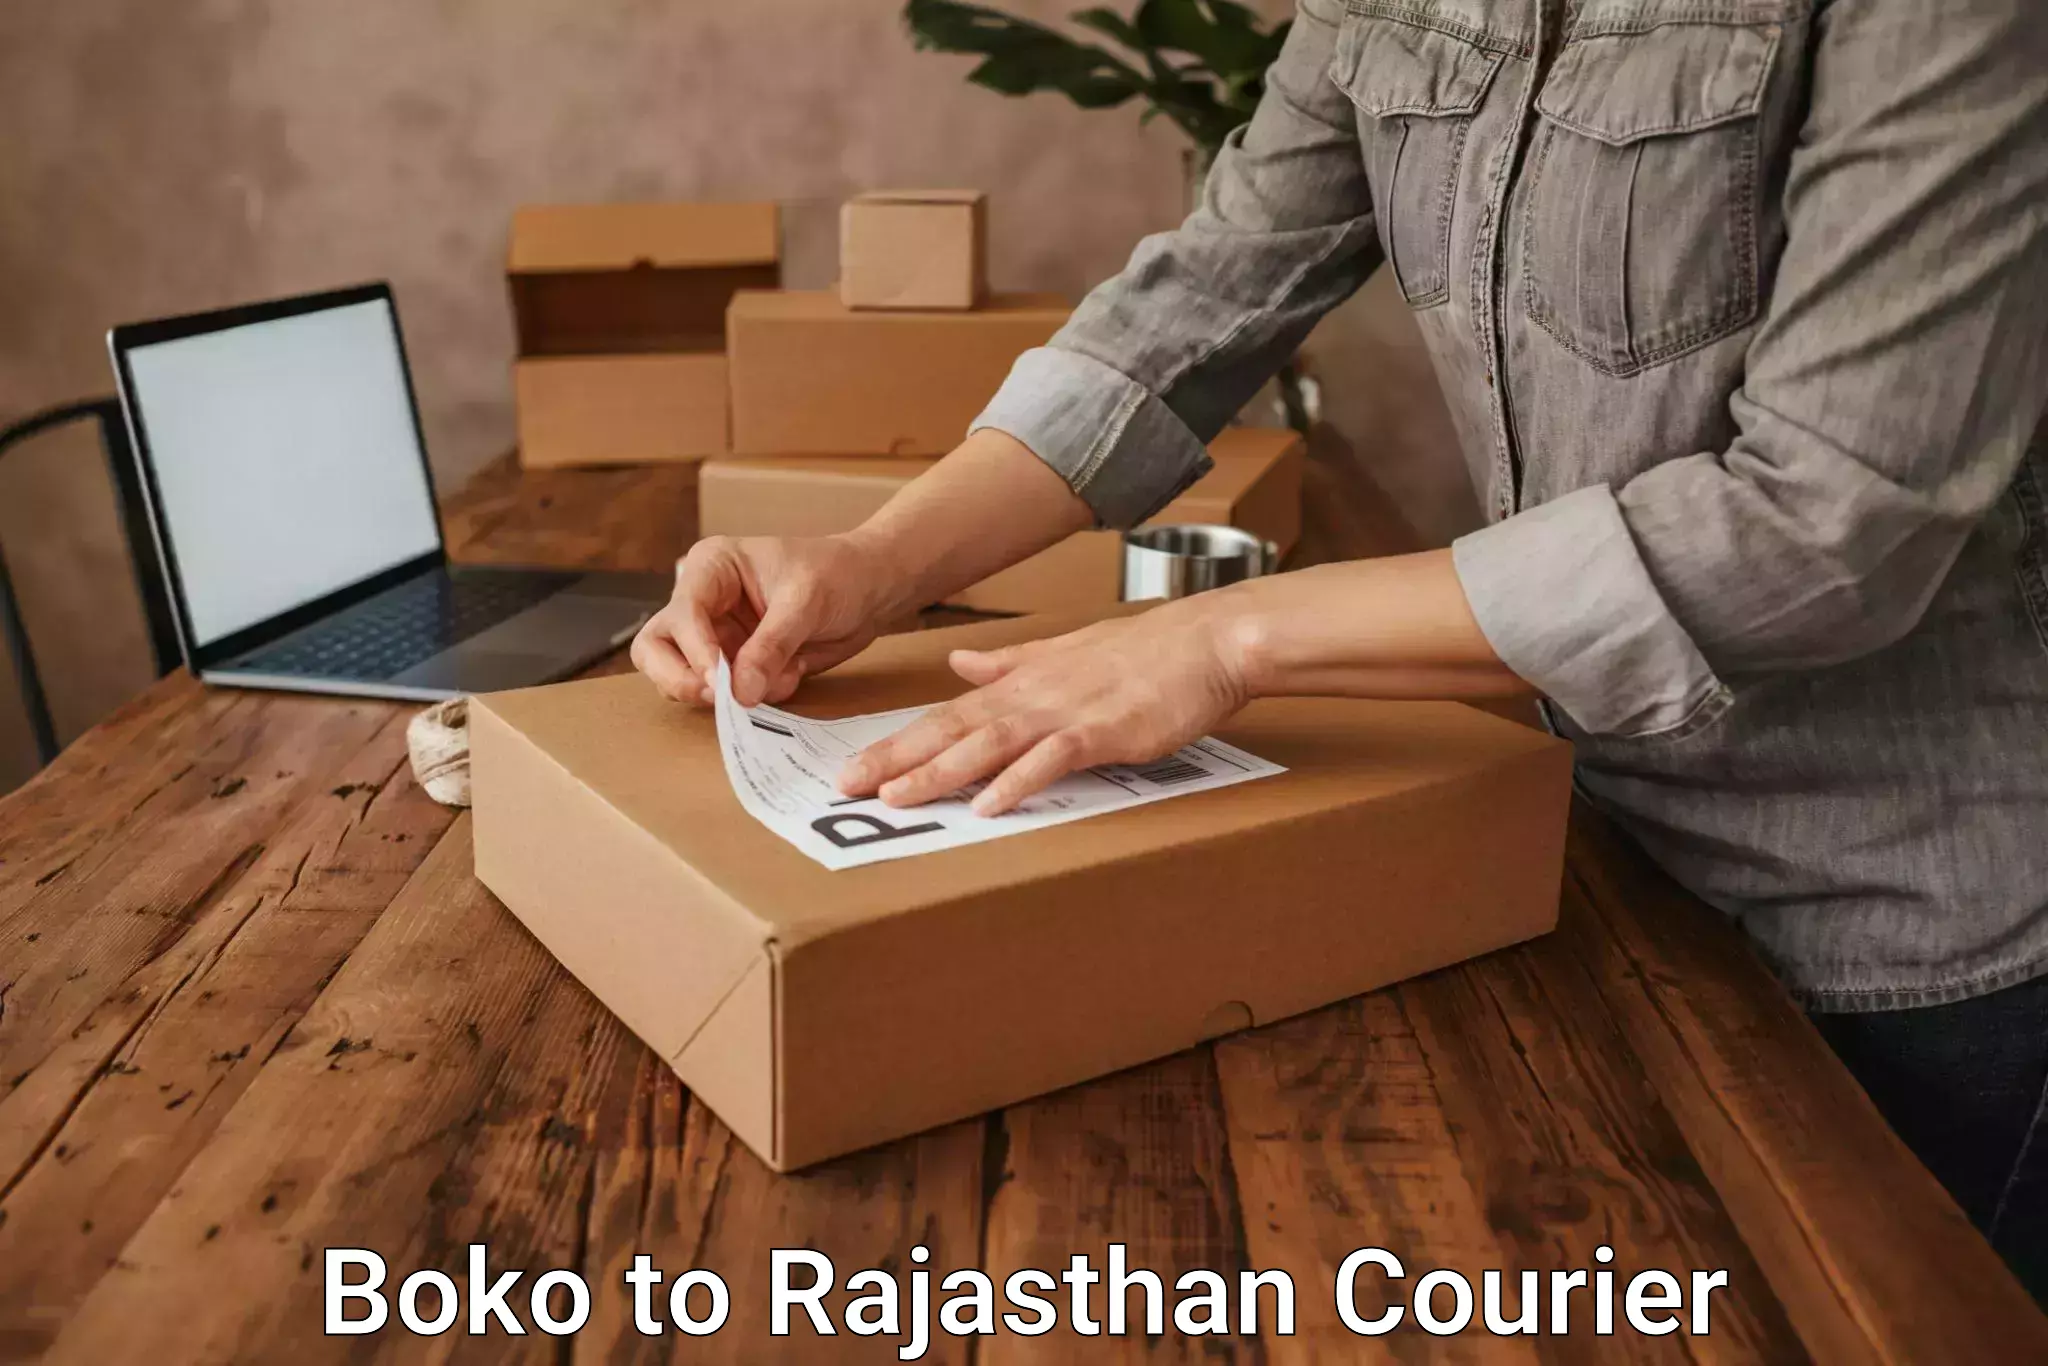 Flexible delivery scheduling in Boko to Rajgarh Rajasthan